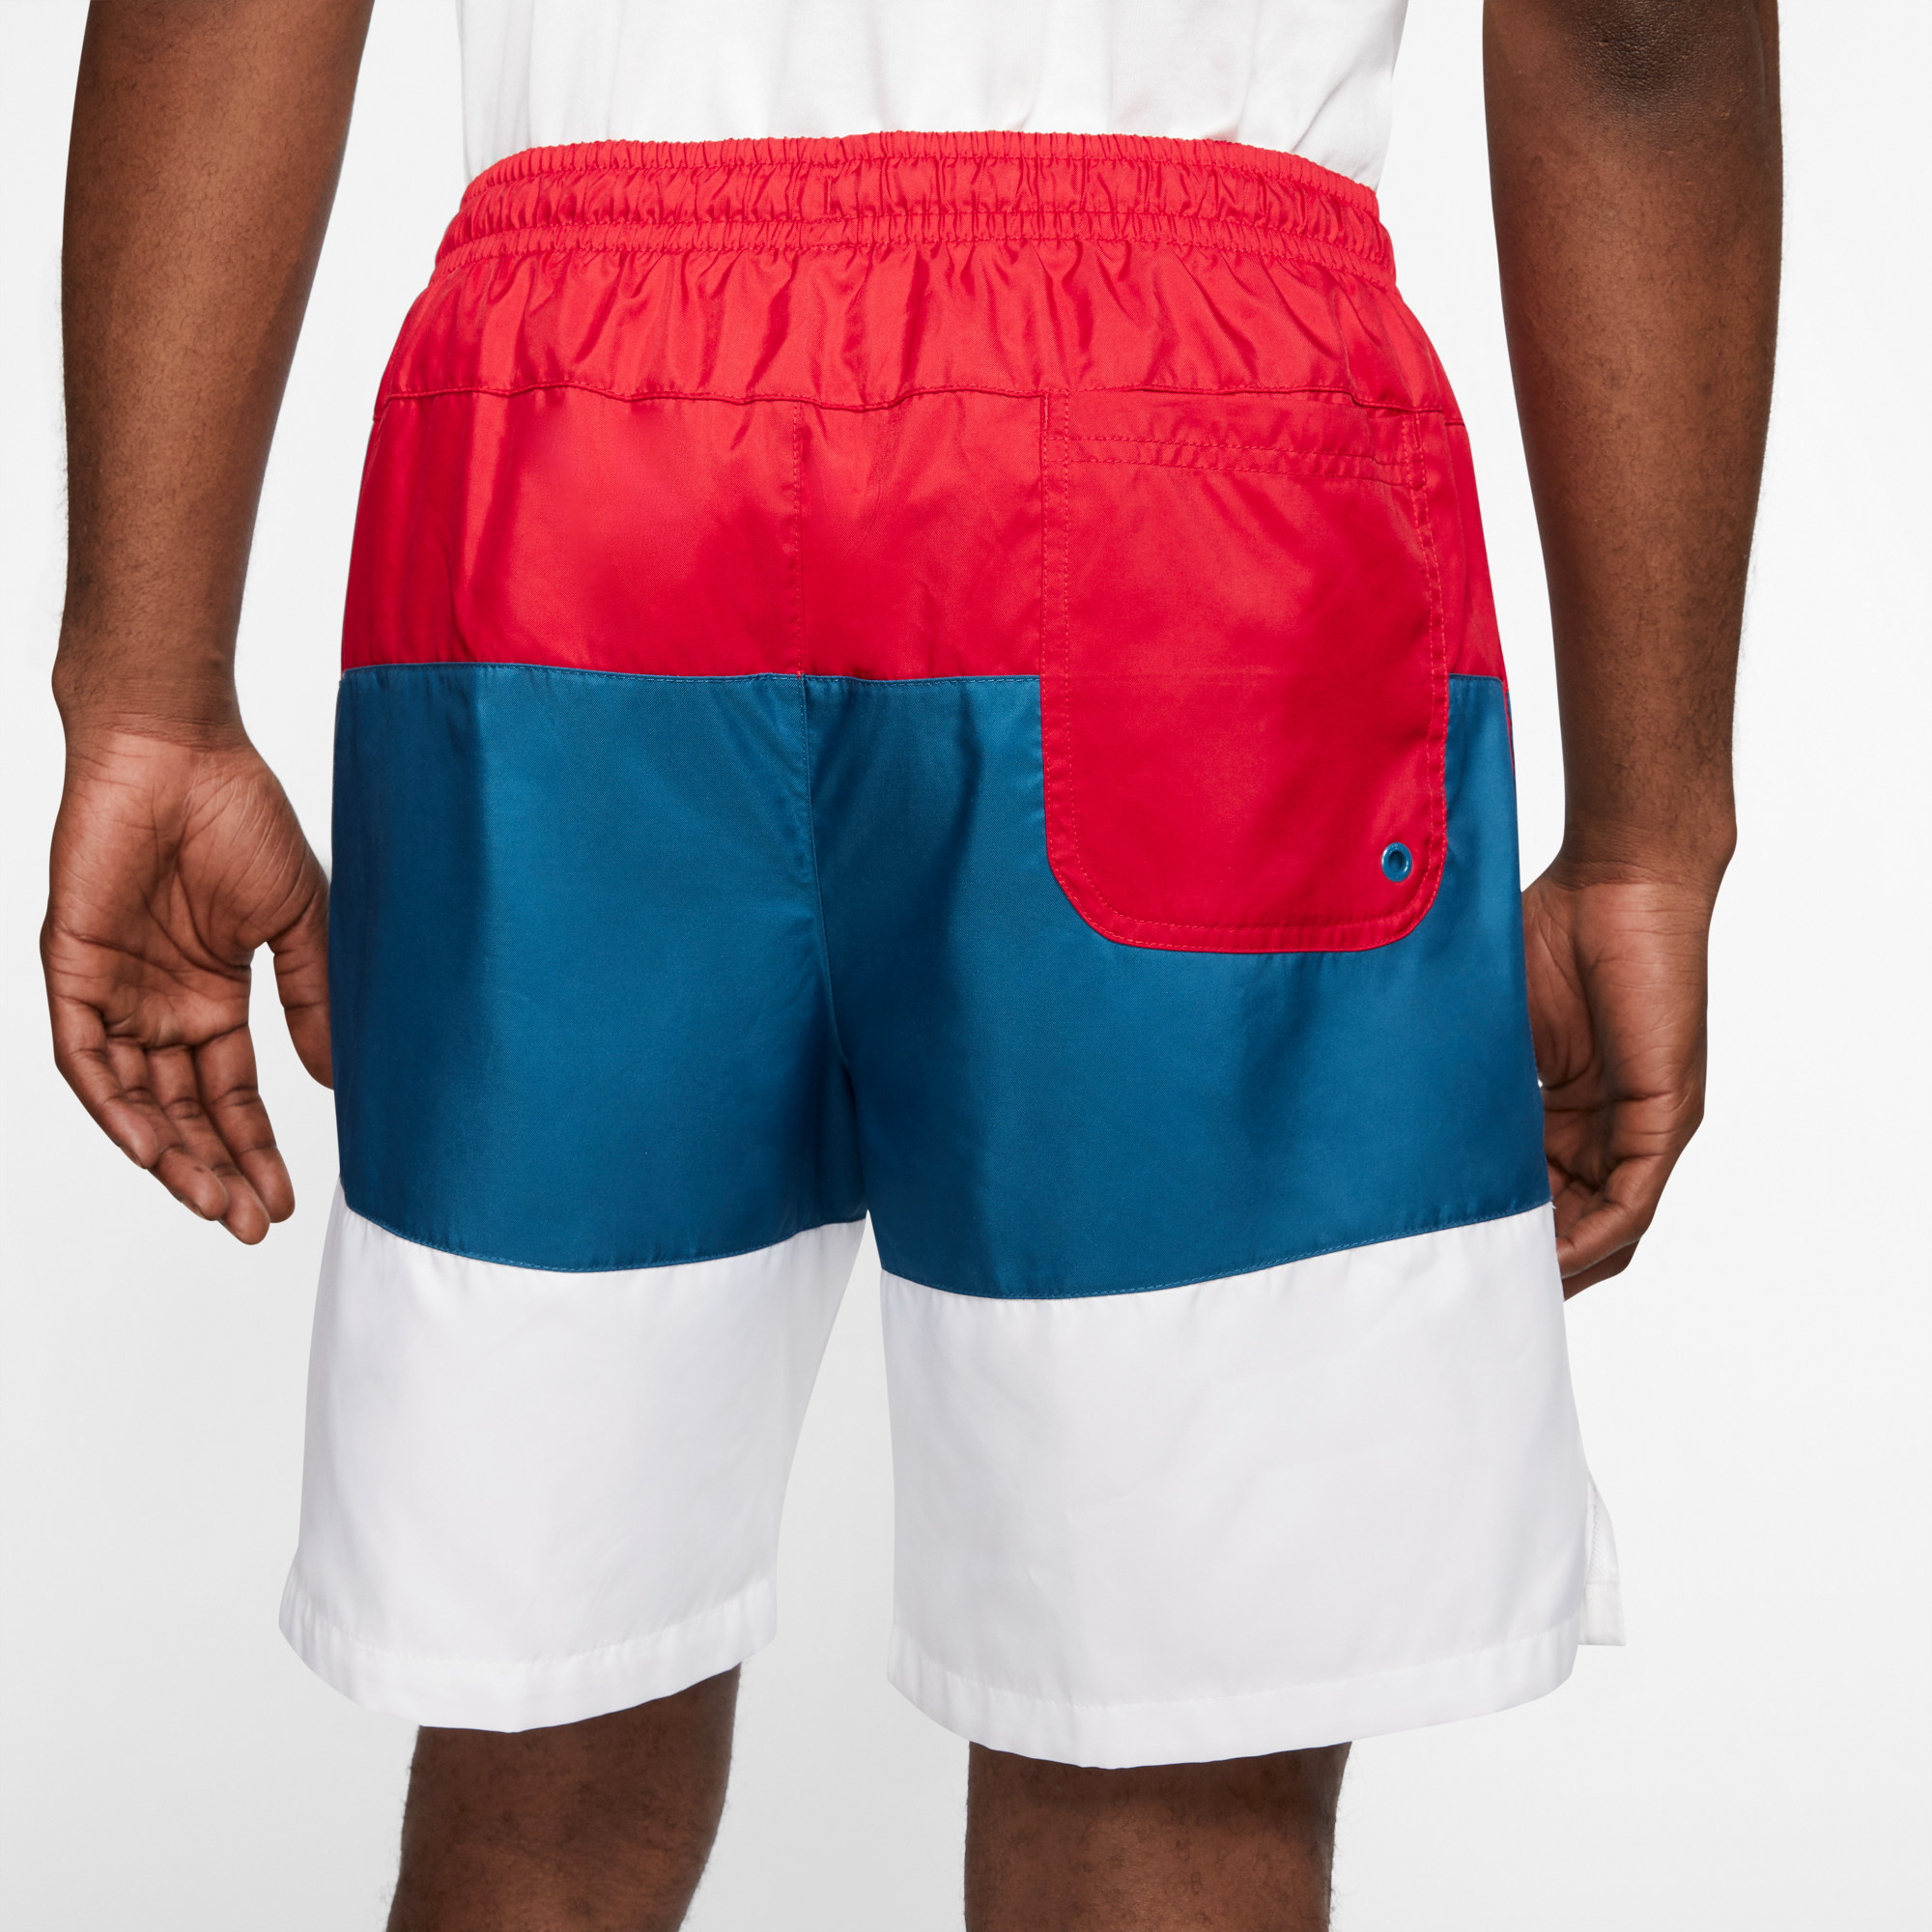 red white and blue nike shorts